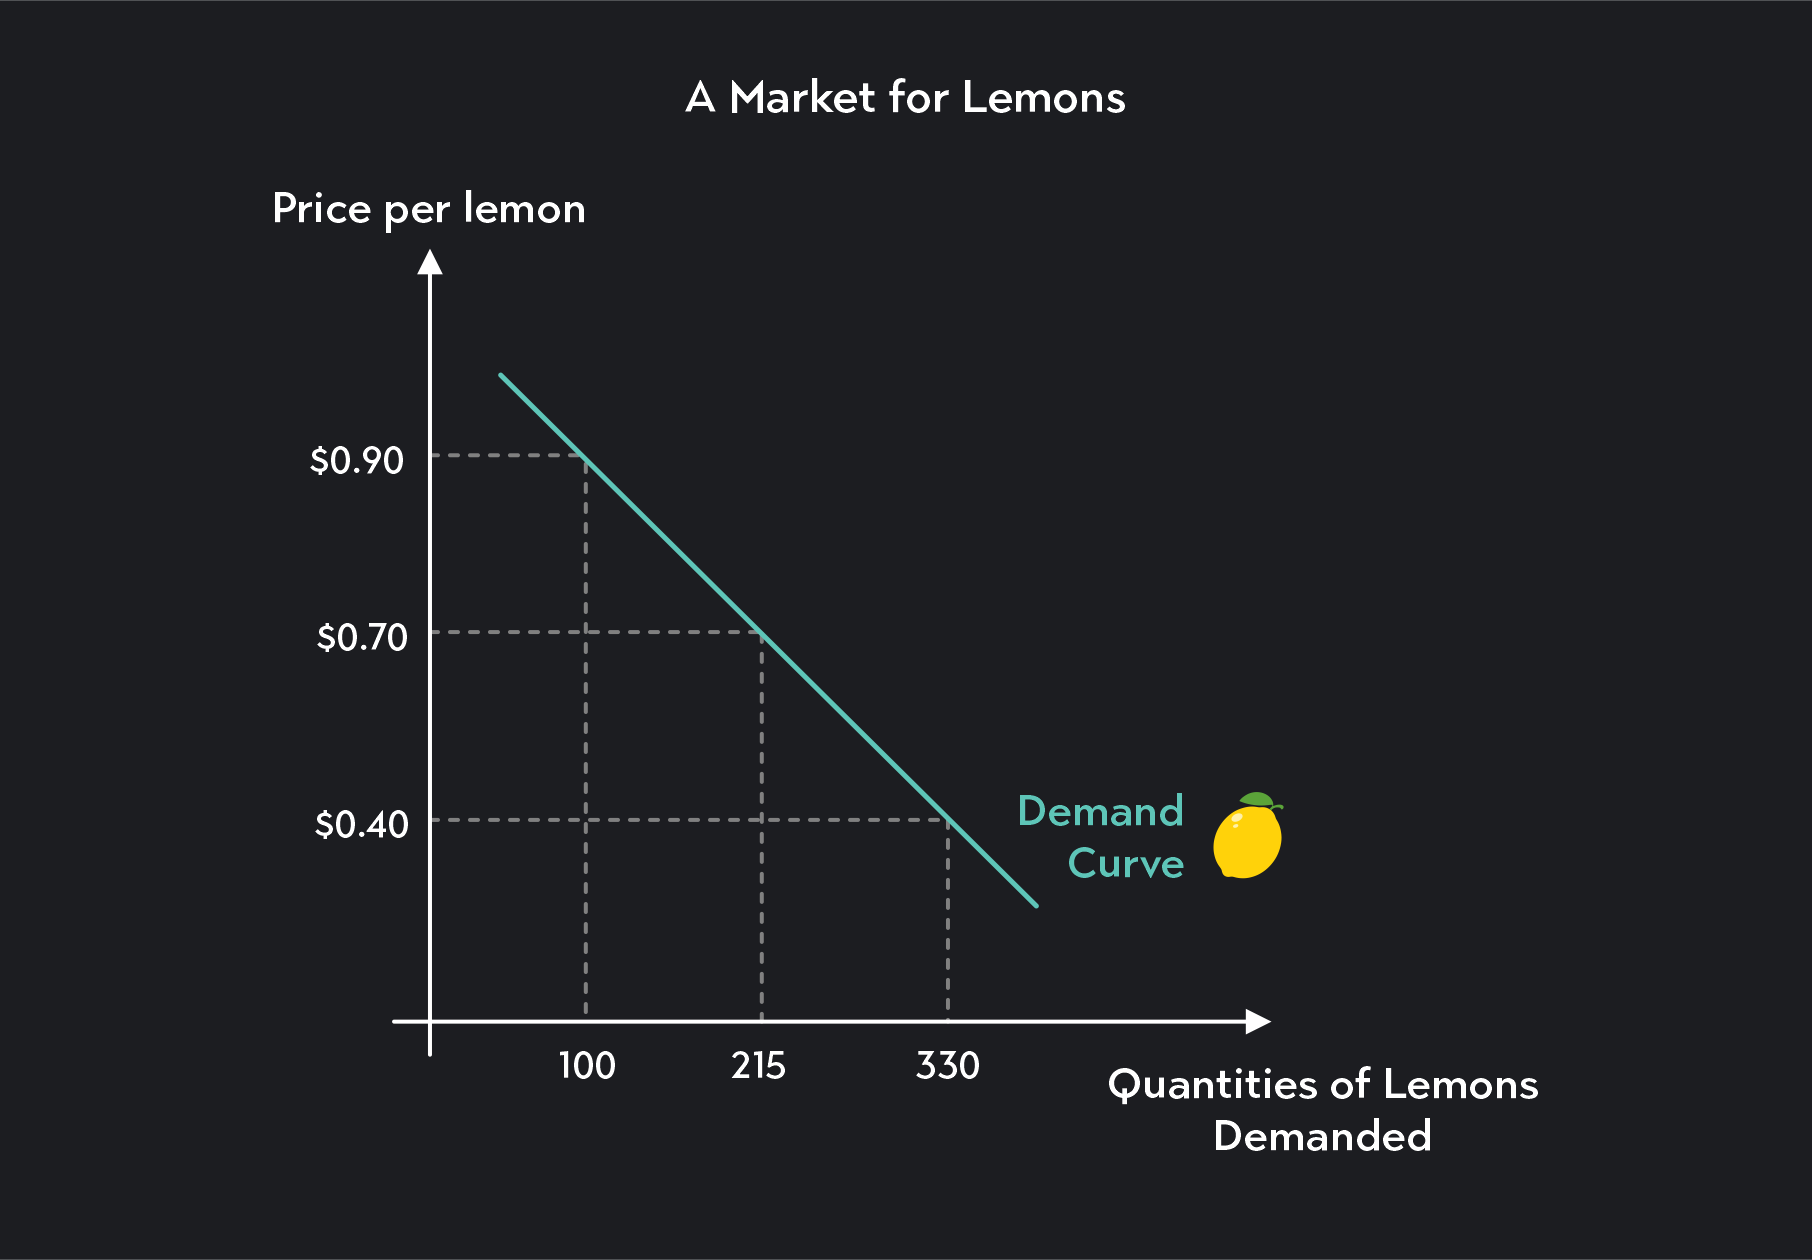 the per unit price of lemons is on the vertical axis, and the quantities demanded at various prices are shown on the horizontal axis